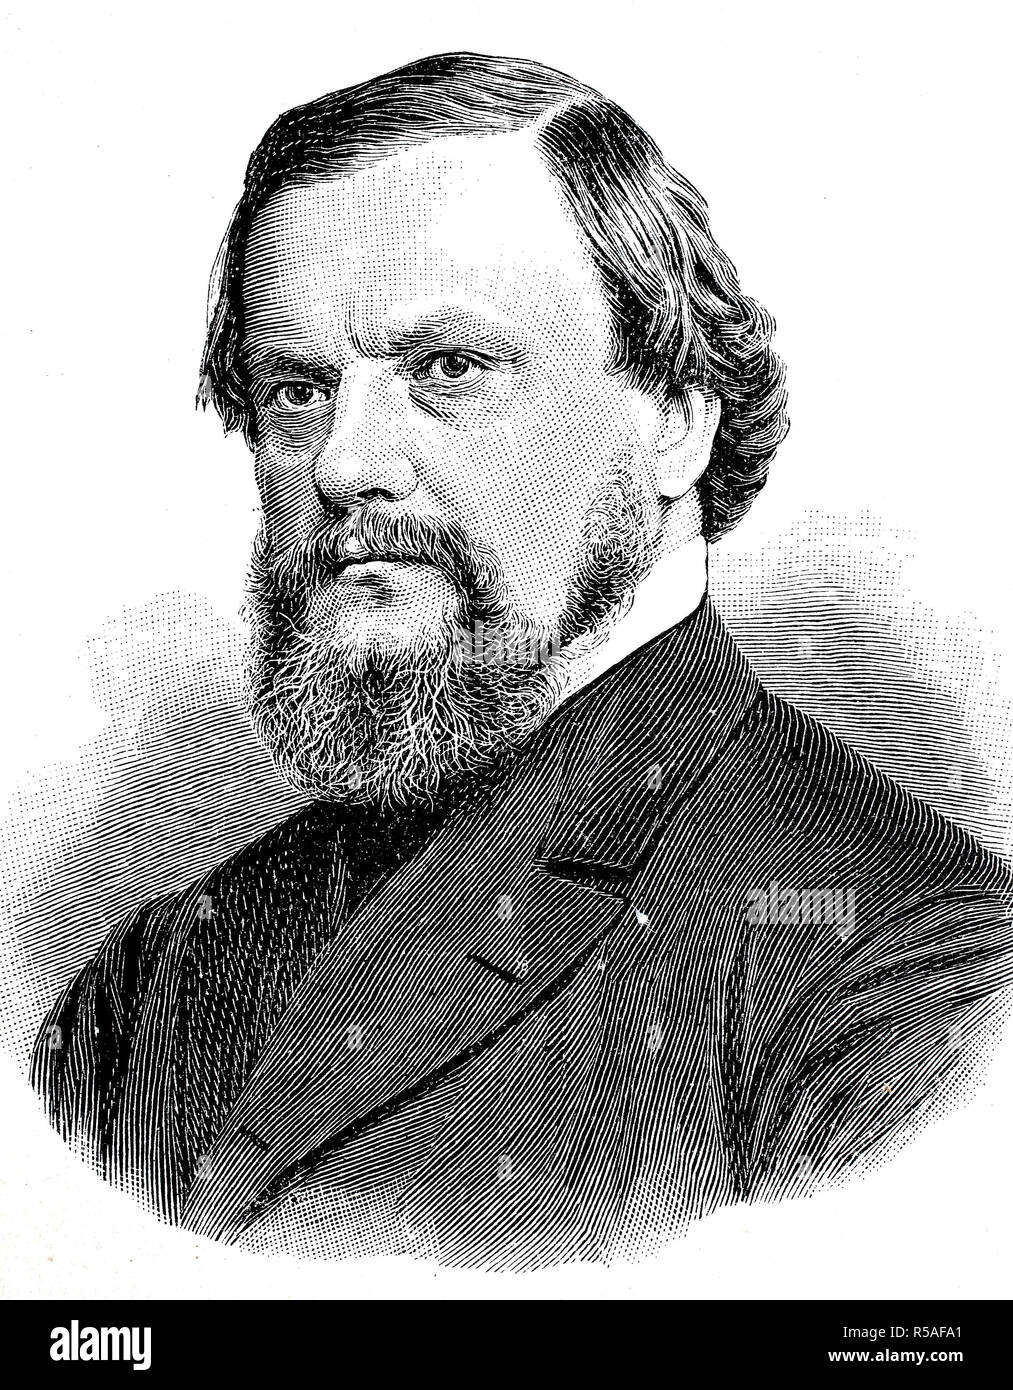 Paul Ludwig Adalbert Falk, August 10, 1827, July 7, 1900, Prussian Minister of Culture, woodcut, Germany Stock Photo